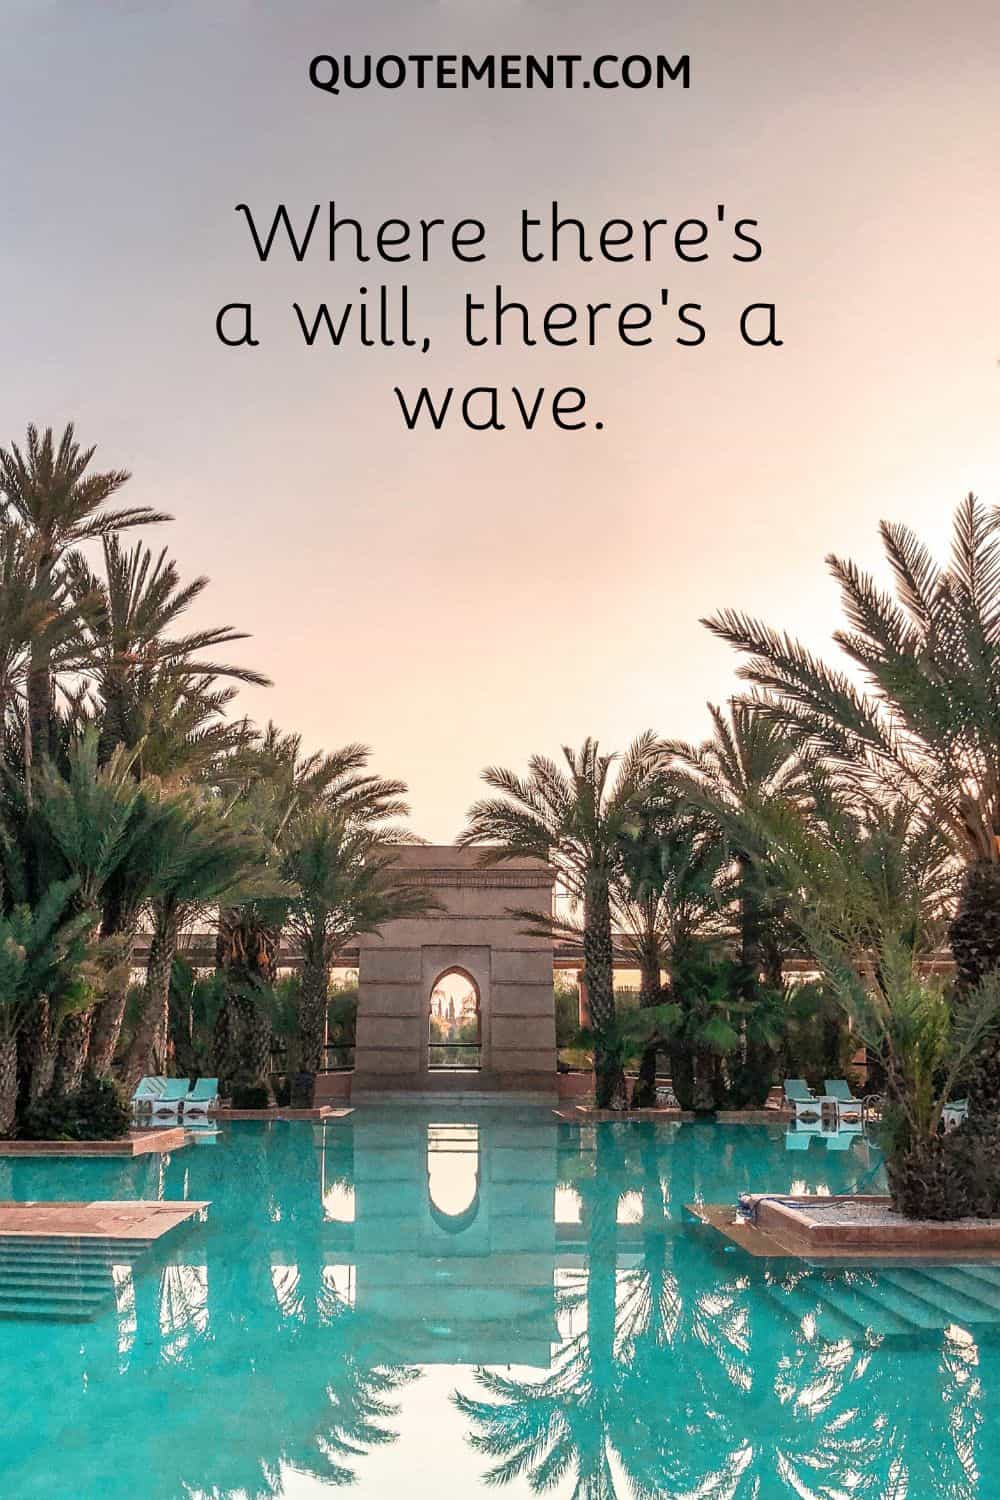 Where there’s a will, there’s a wave.